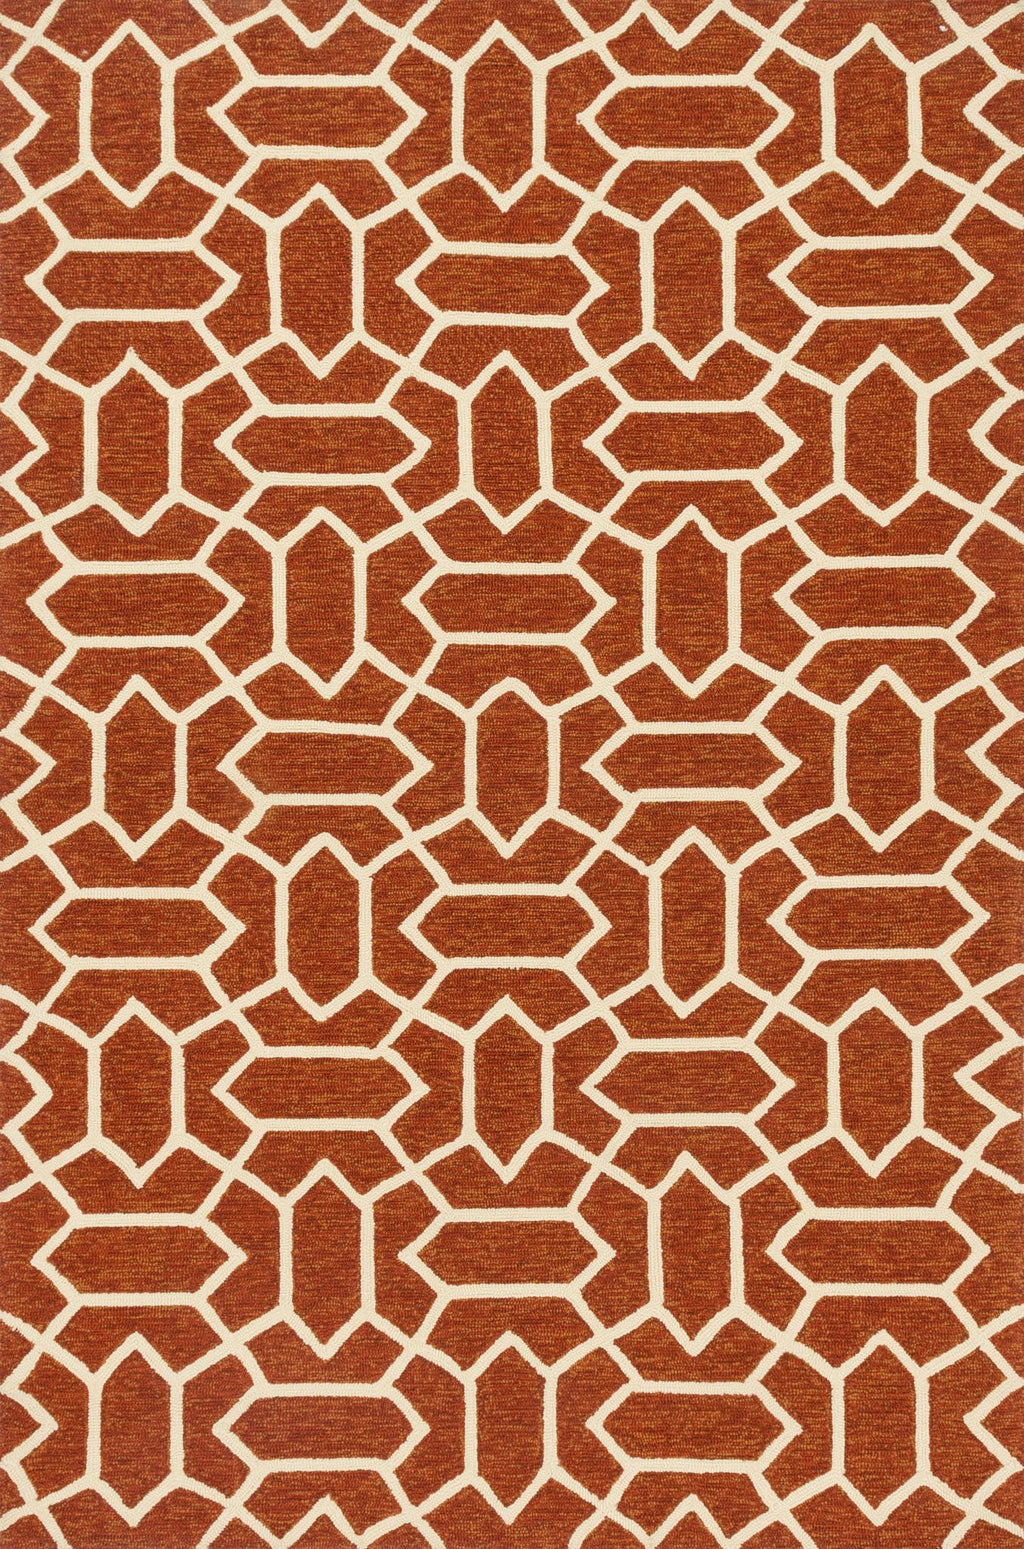 VENICE BEACH Collection Rug  in  RUST / IVORY Rust Small Hand-Hooked Polypropylene